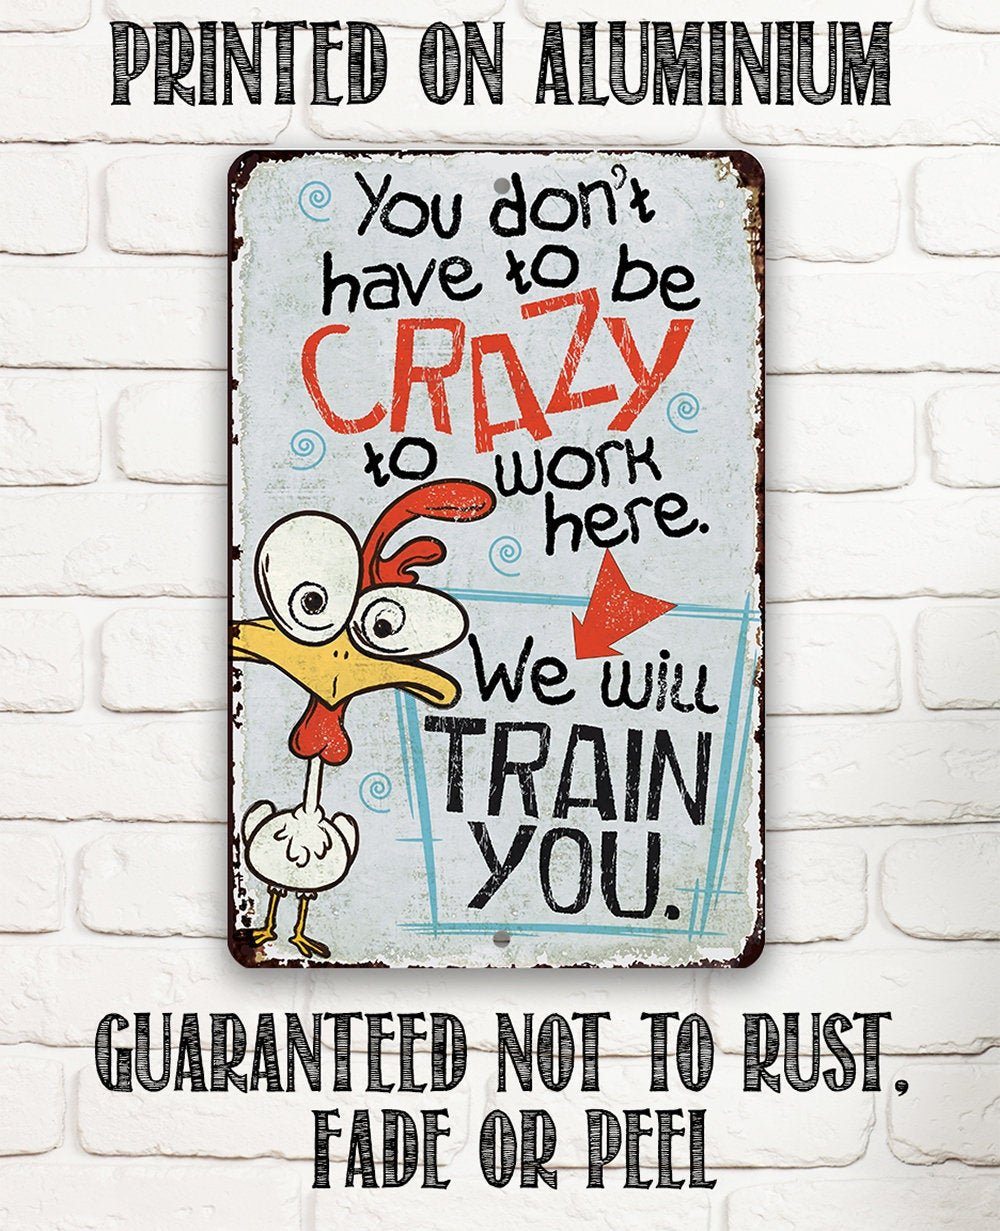 You Don't Have To Be Crazy To Work Here We'll Train You Funny Iron